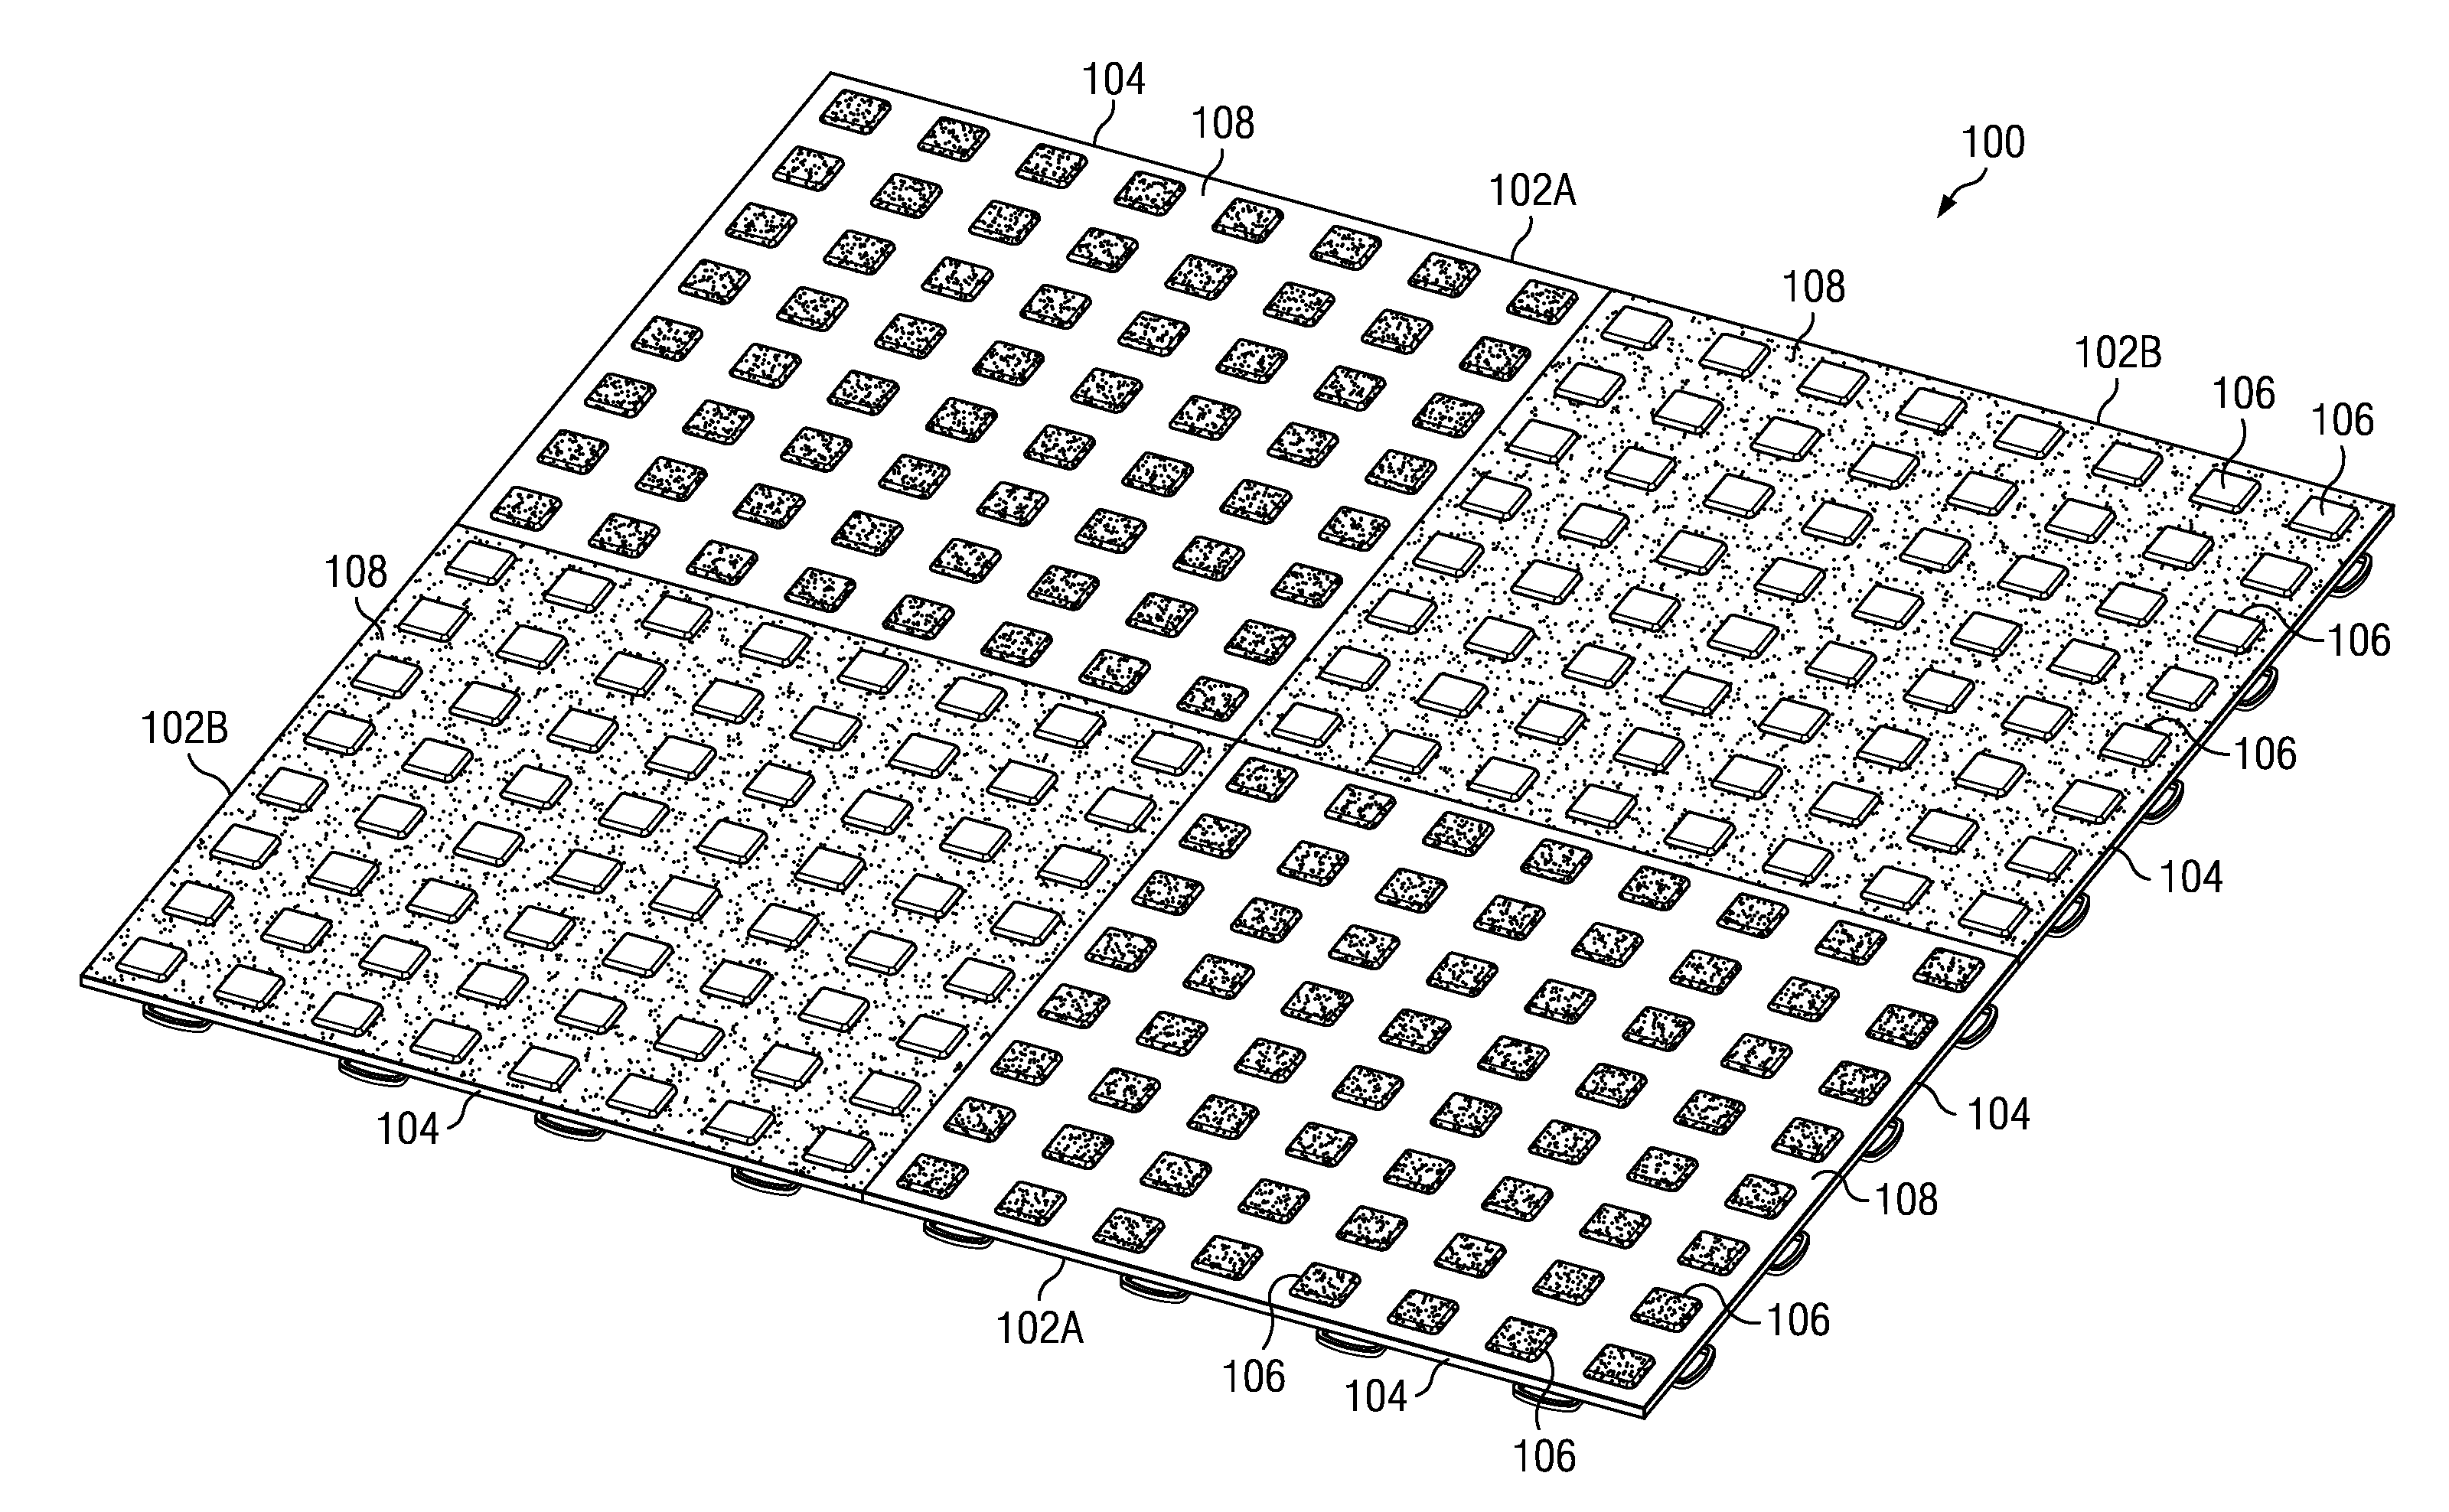 Two-shot injection molded floor tile with vent hole